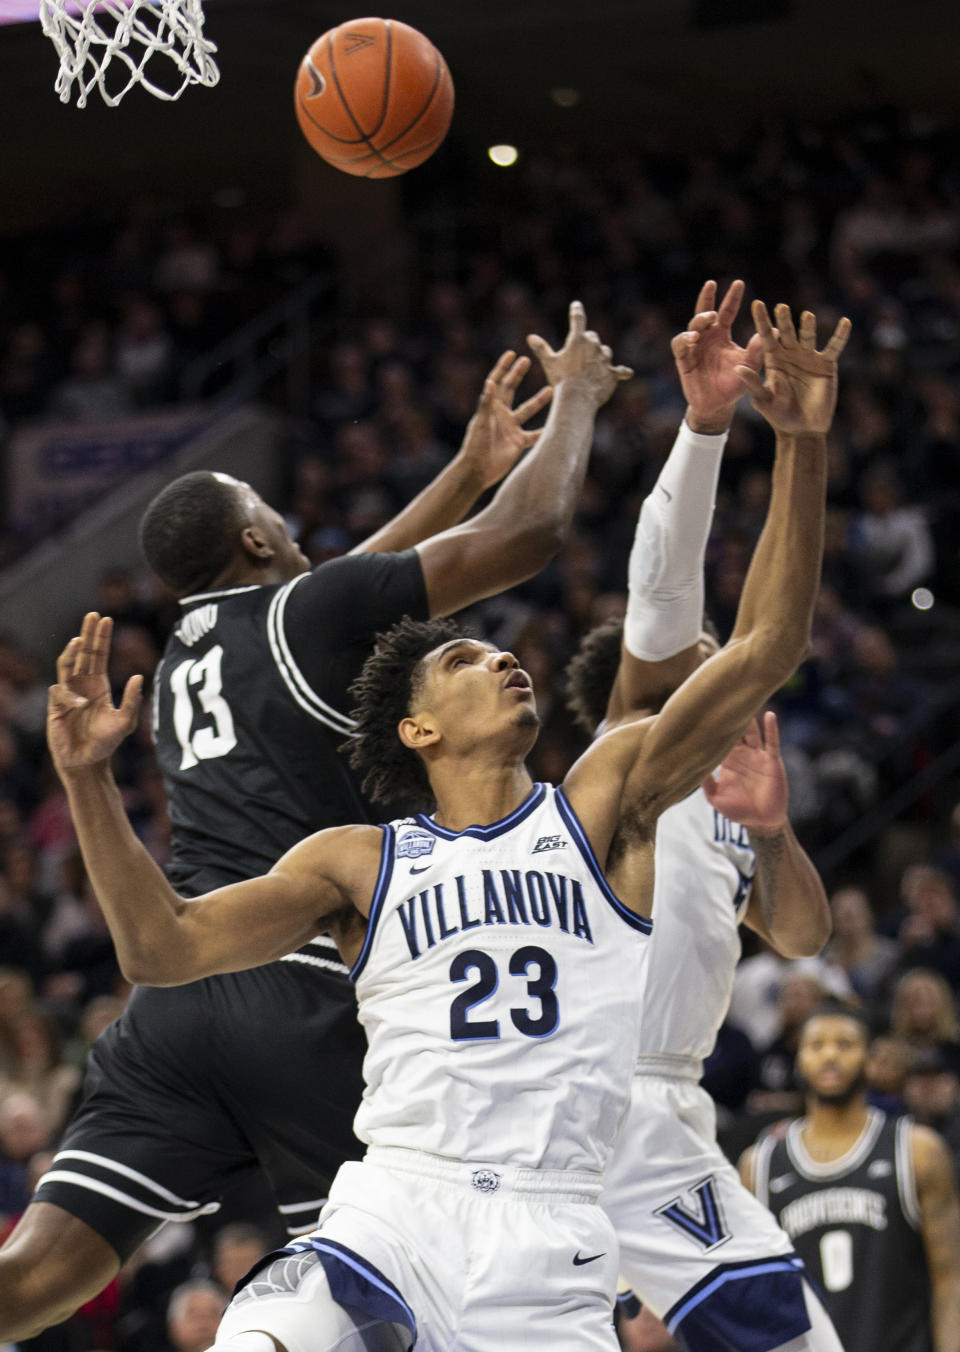 Villanova forward Jermaine Samuels (23) and Providence forward Kalif Young (13) reach for a rebound during the second half of an NCAA college basketball game, Saturday, Feb. 29, 2020, in Philadelphia. Providence won 58-54. (AP Photo/Laurence Kesterson)